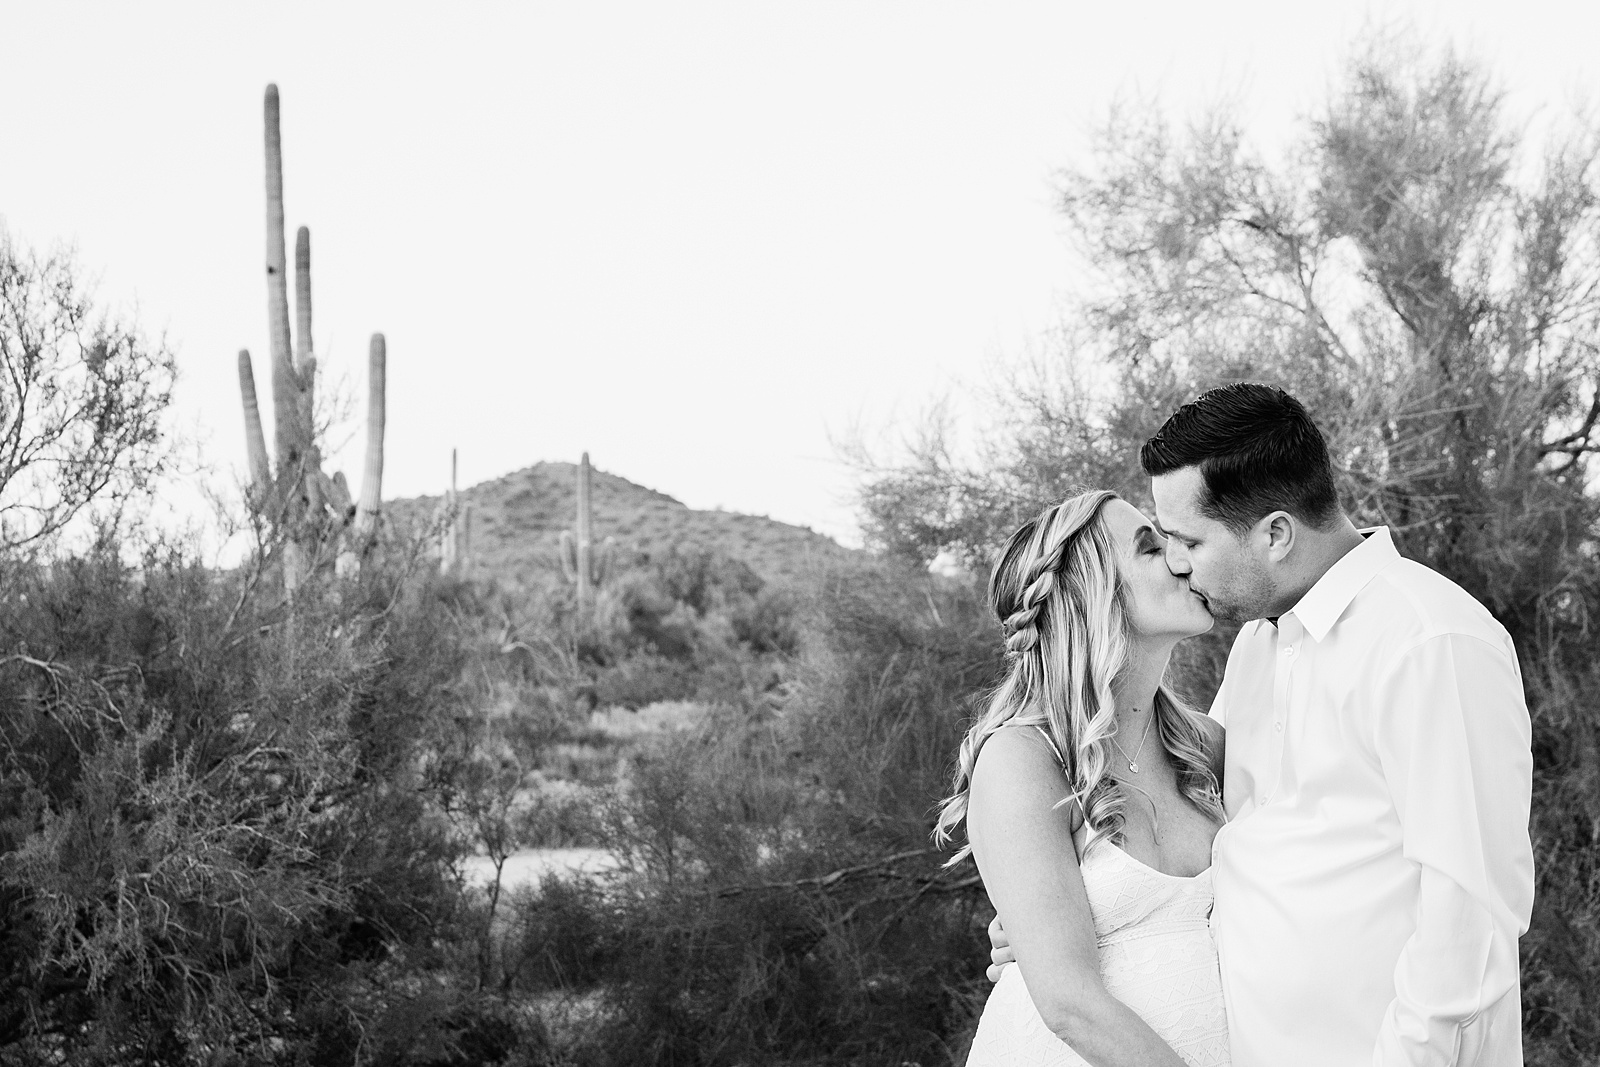 Pregnant bride and Groom share a kiss during their desert backyard elopement in Scottsdale by Arizona wedding photographer PMA Photography.